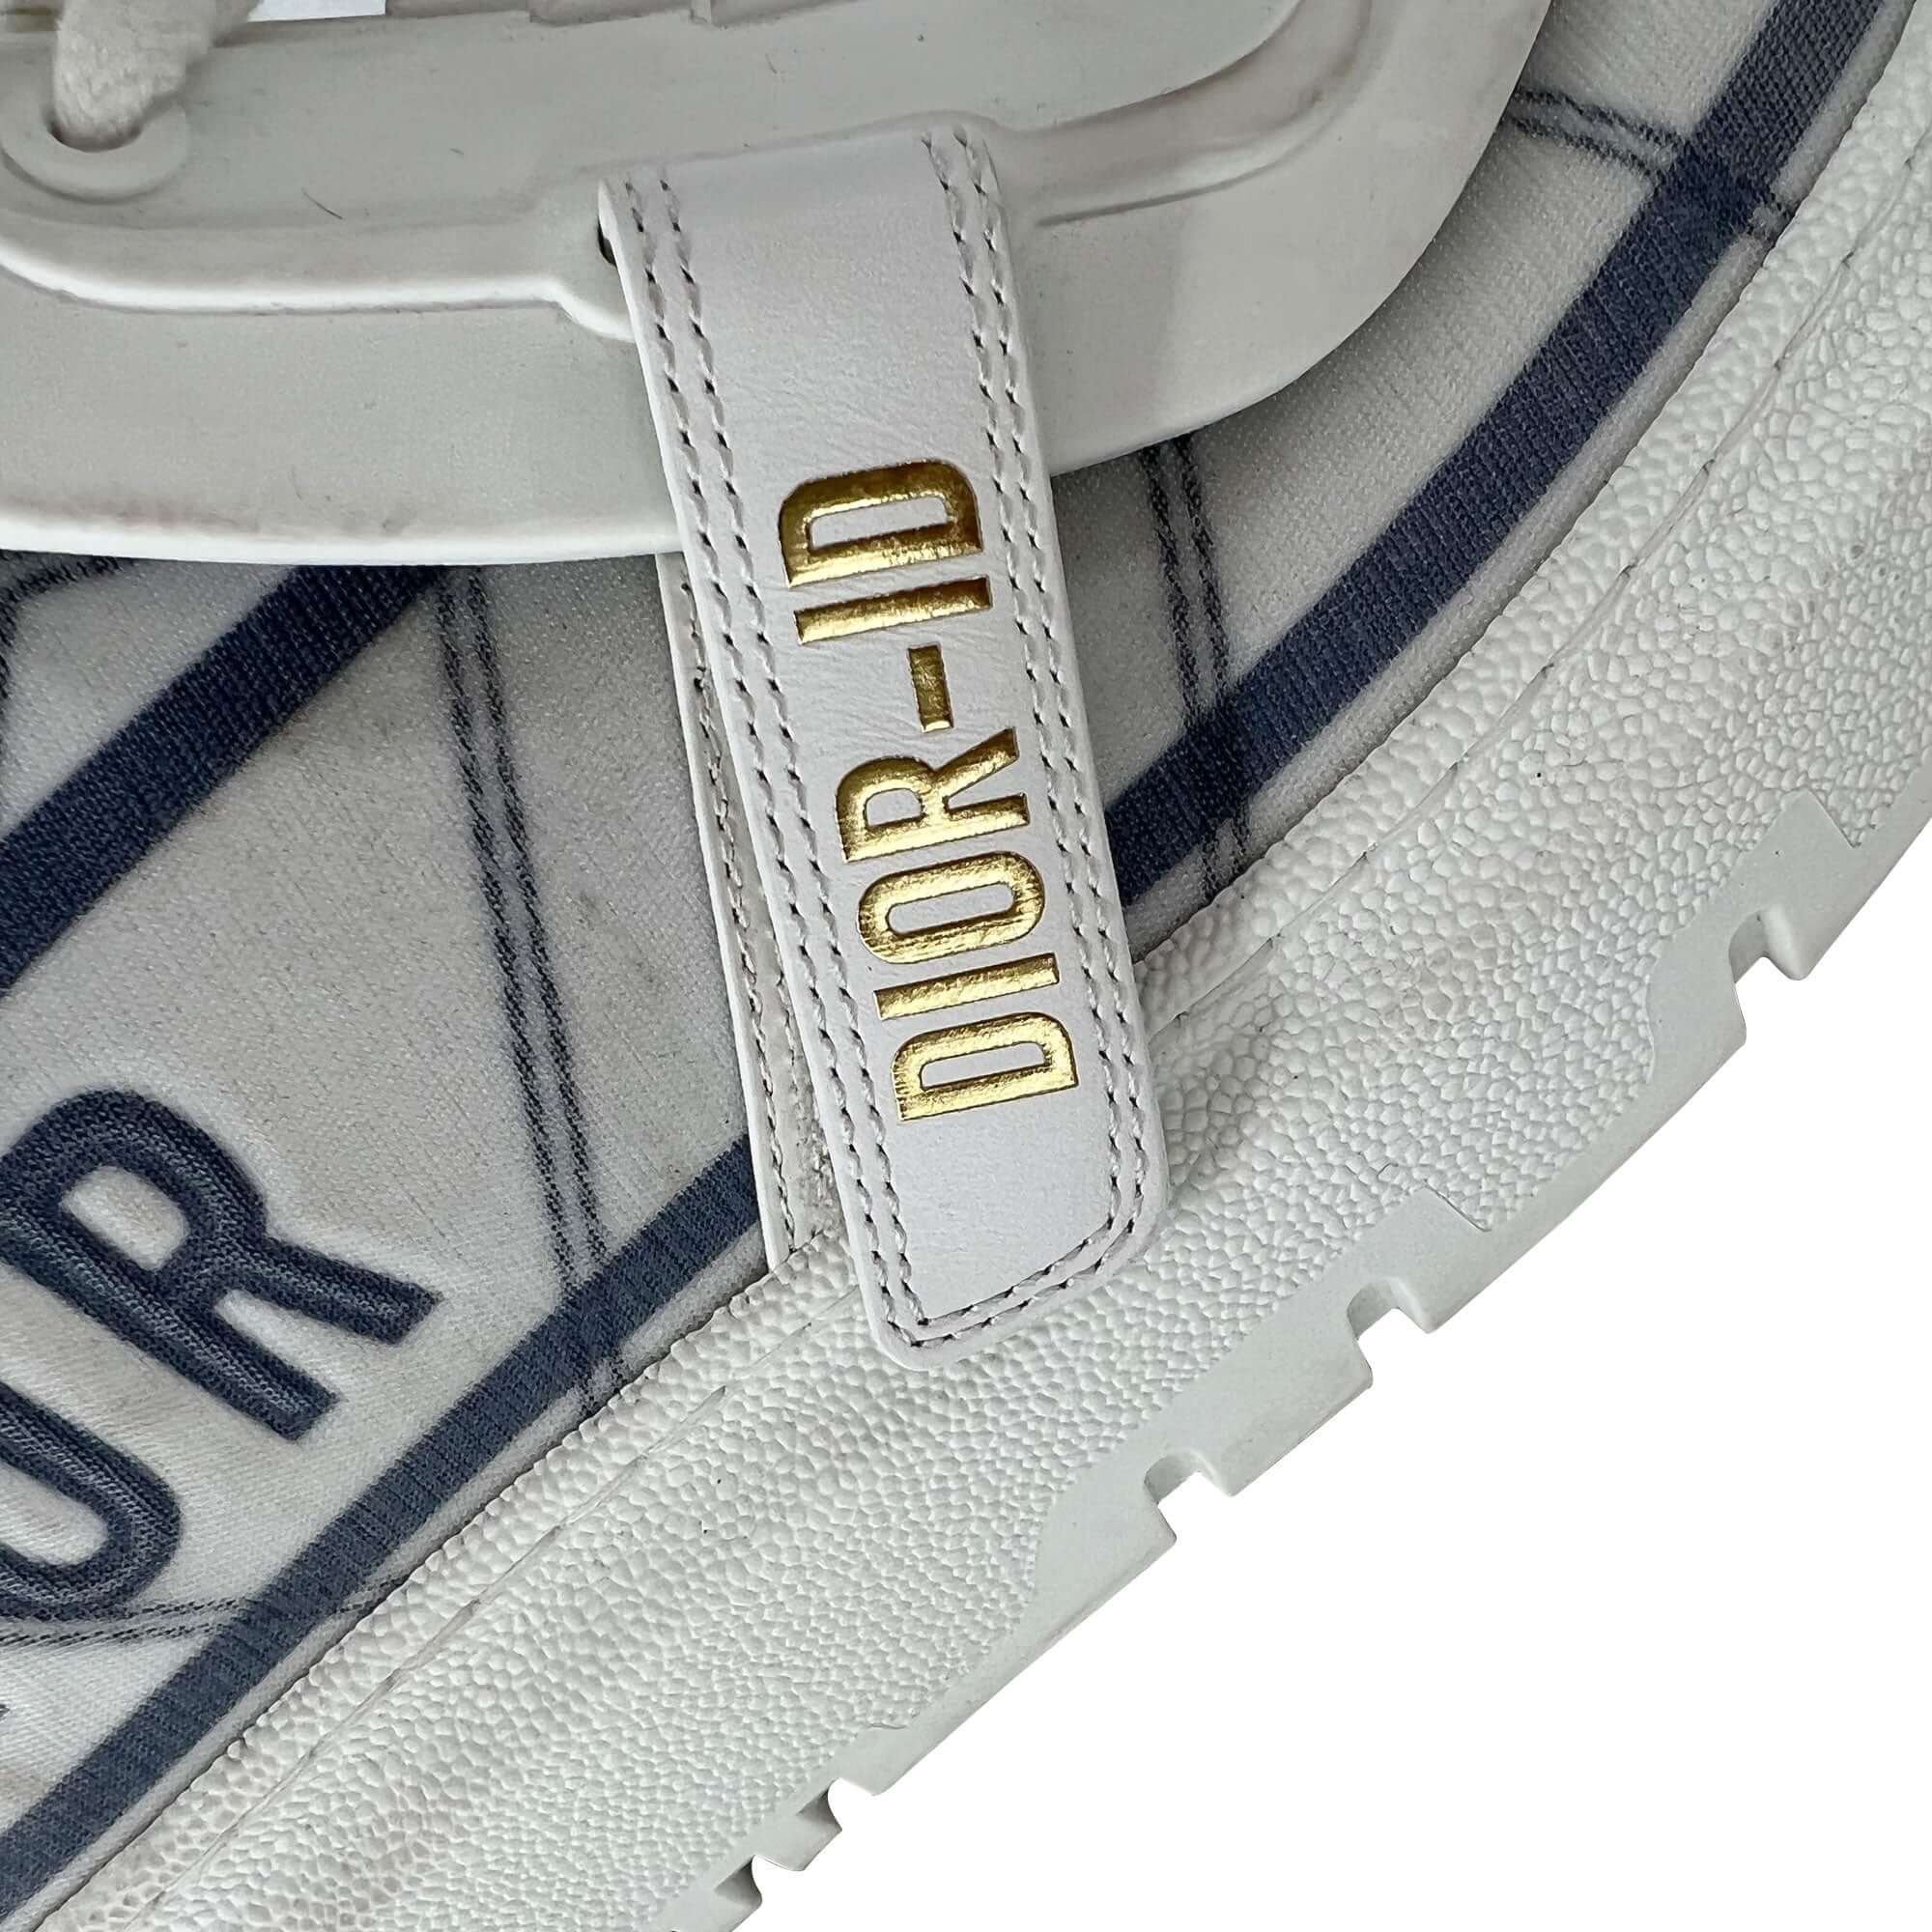 Christian Dior ID sneakers